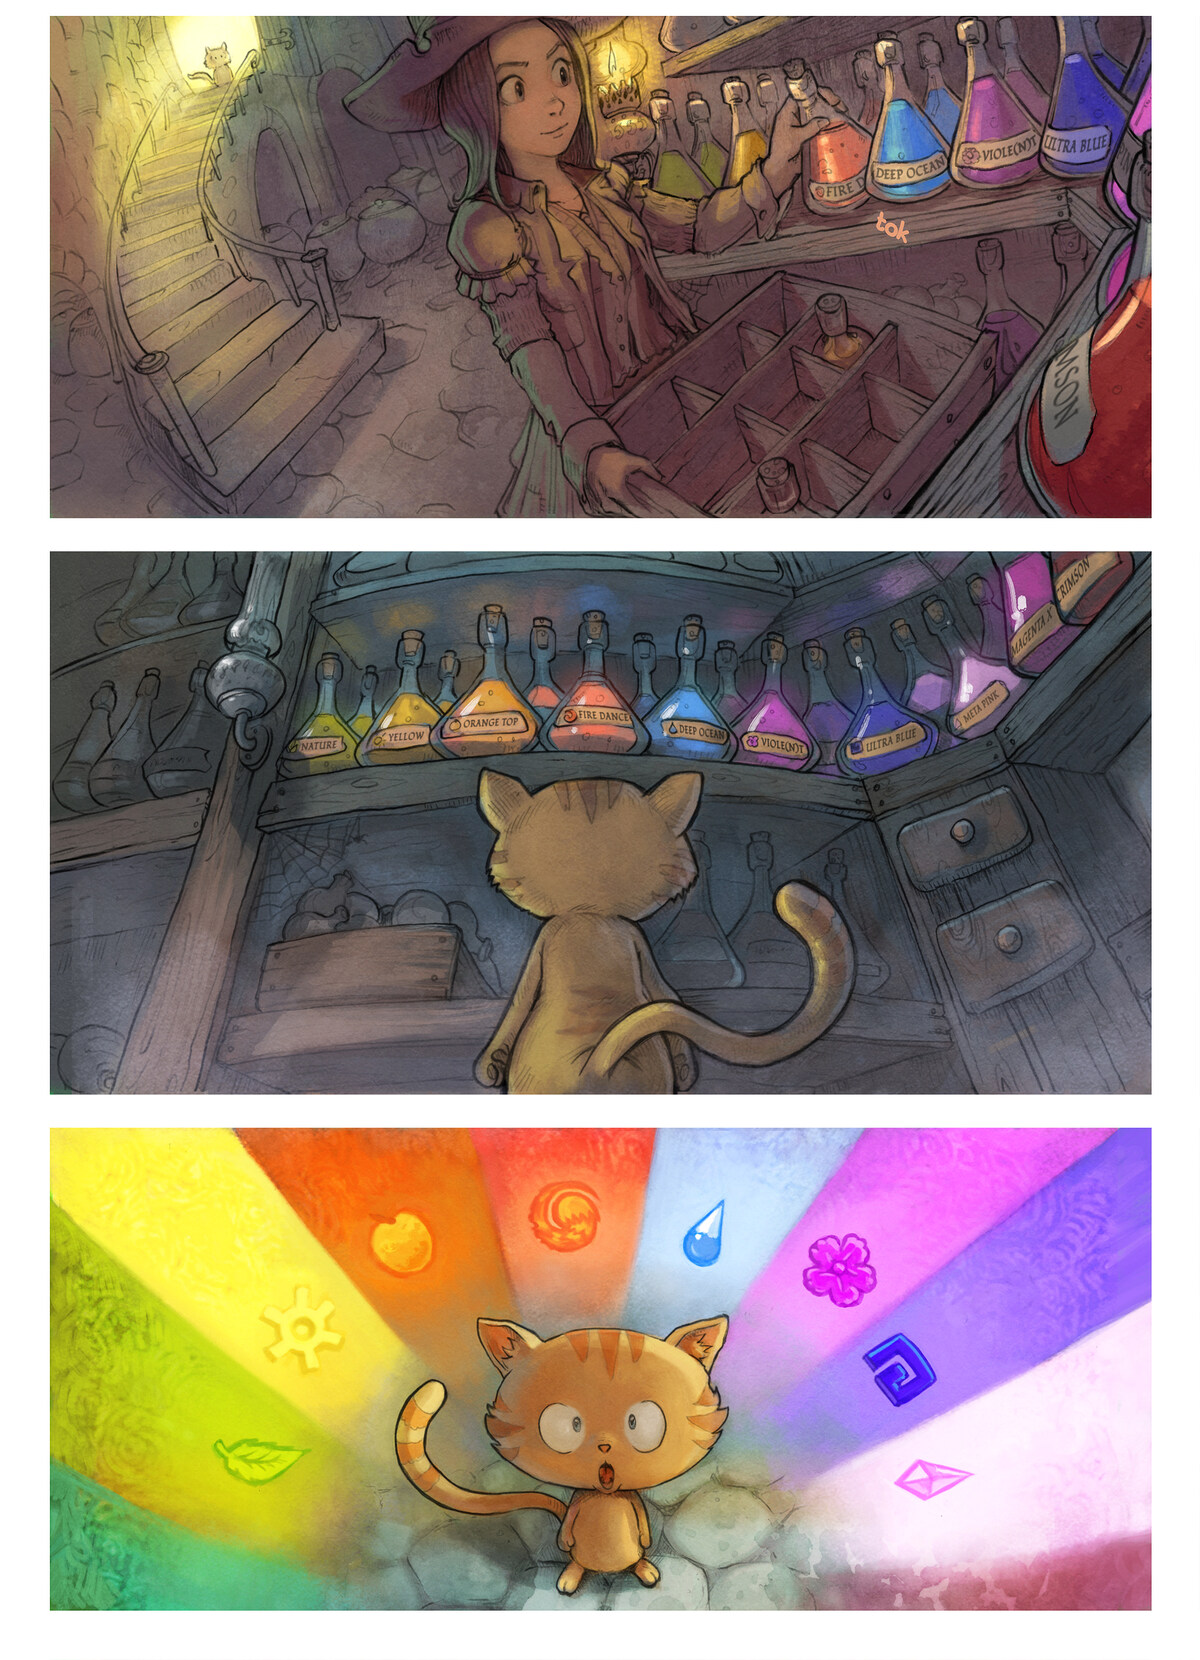 Episode 2 : Rainbow potions, Page 2